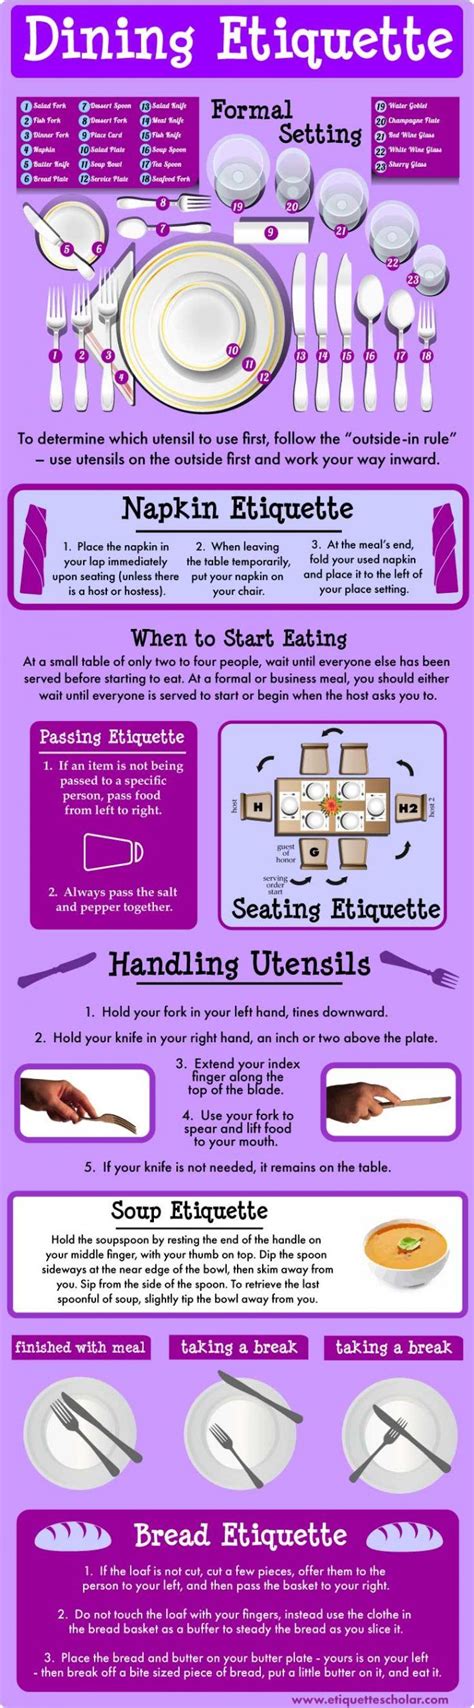 Table Manners 101 Ultimate Guide Video Instructions